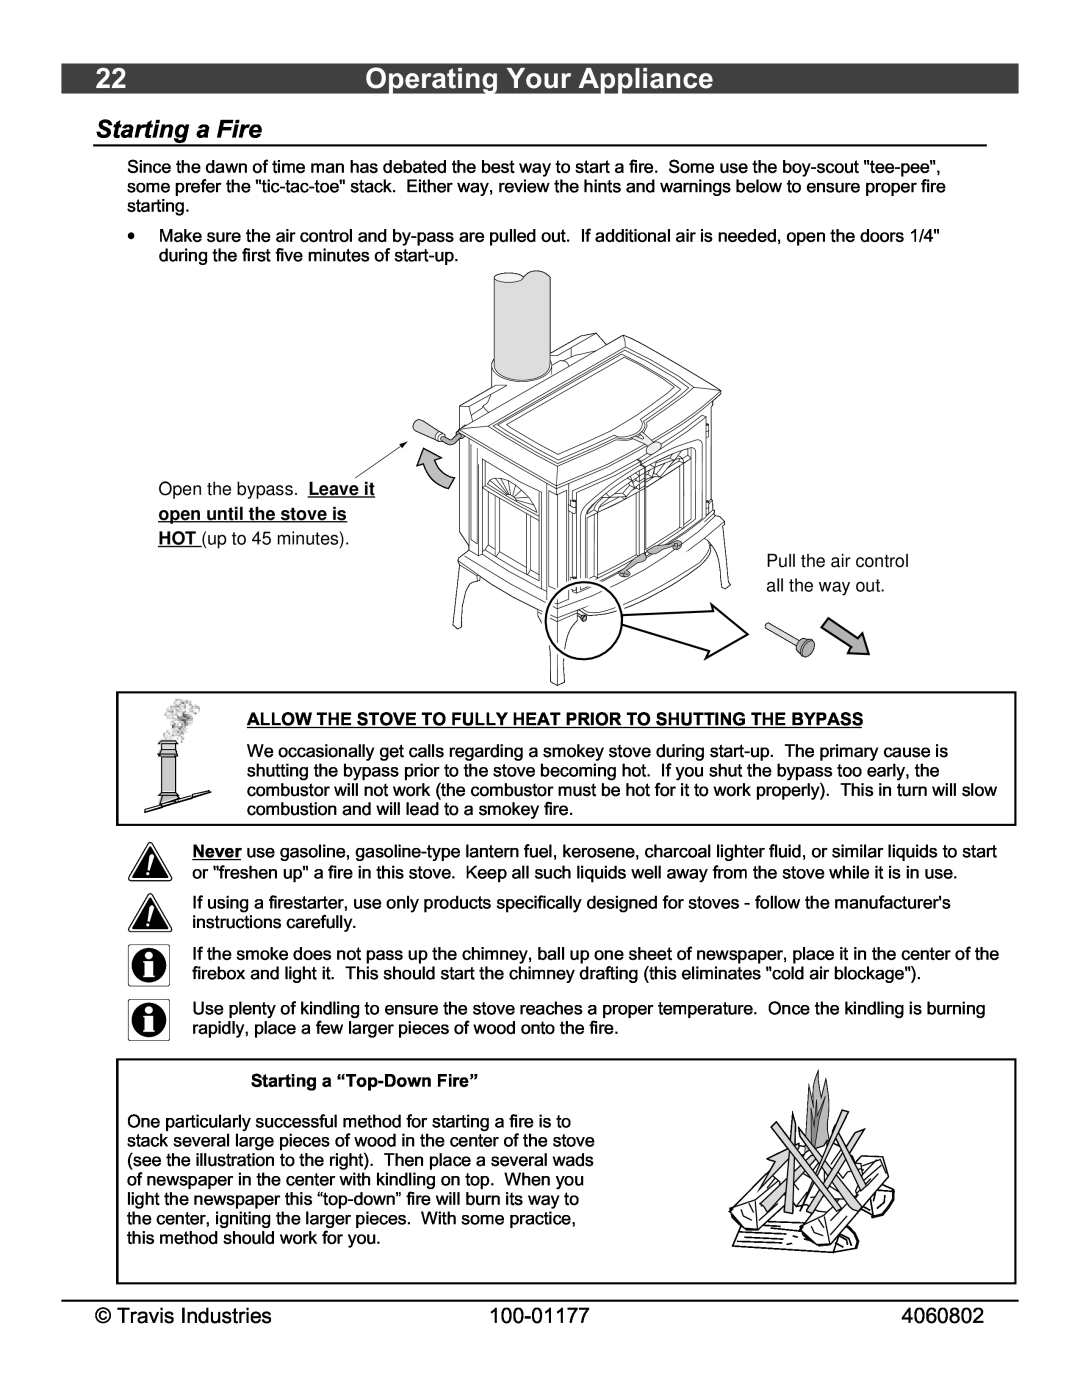 Lopi Leyden Wood Stove Operating Your Appliance, Starting a Fire, open until the stove is, Starting a “Top-DownFire” 